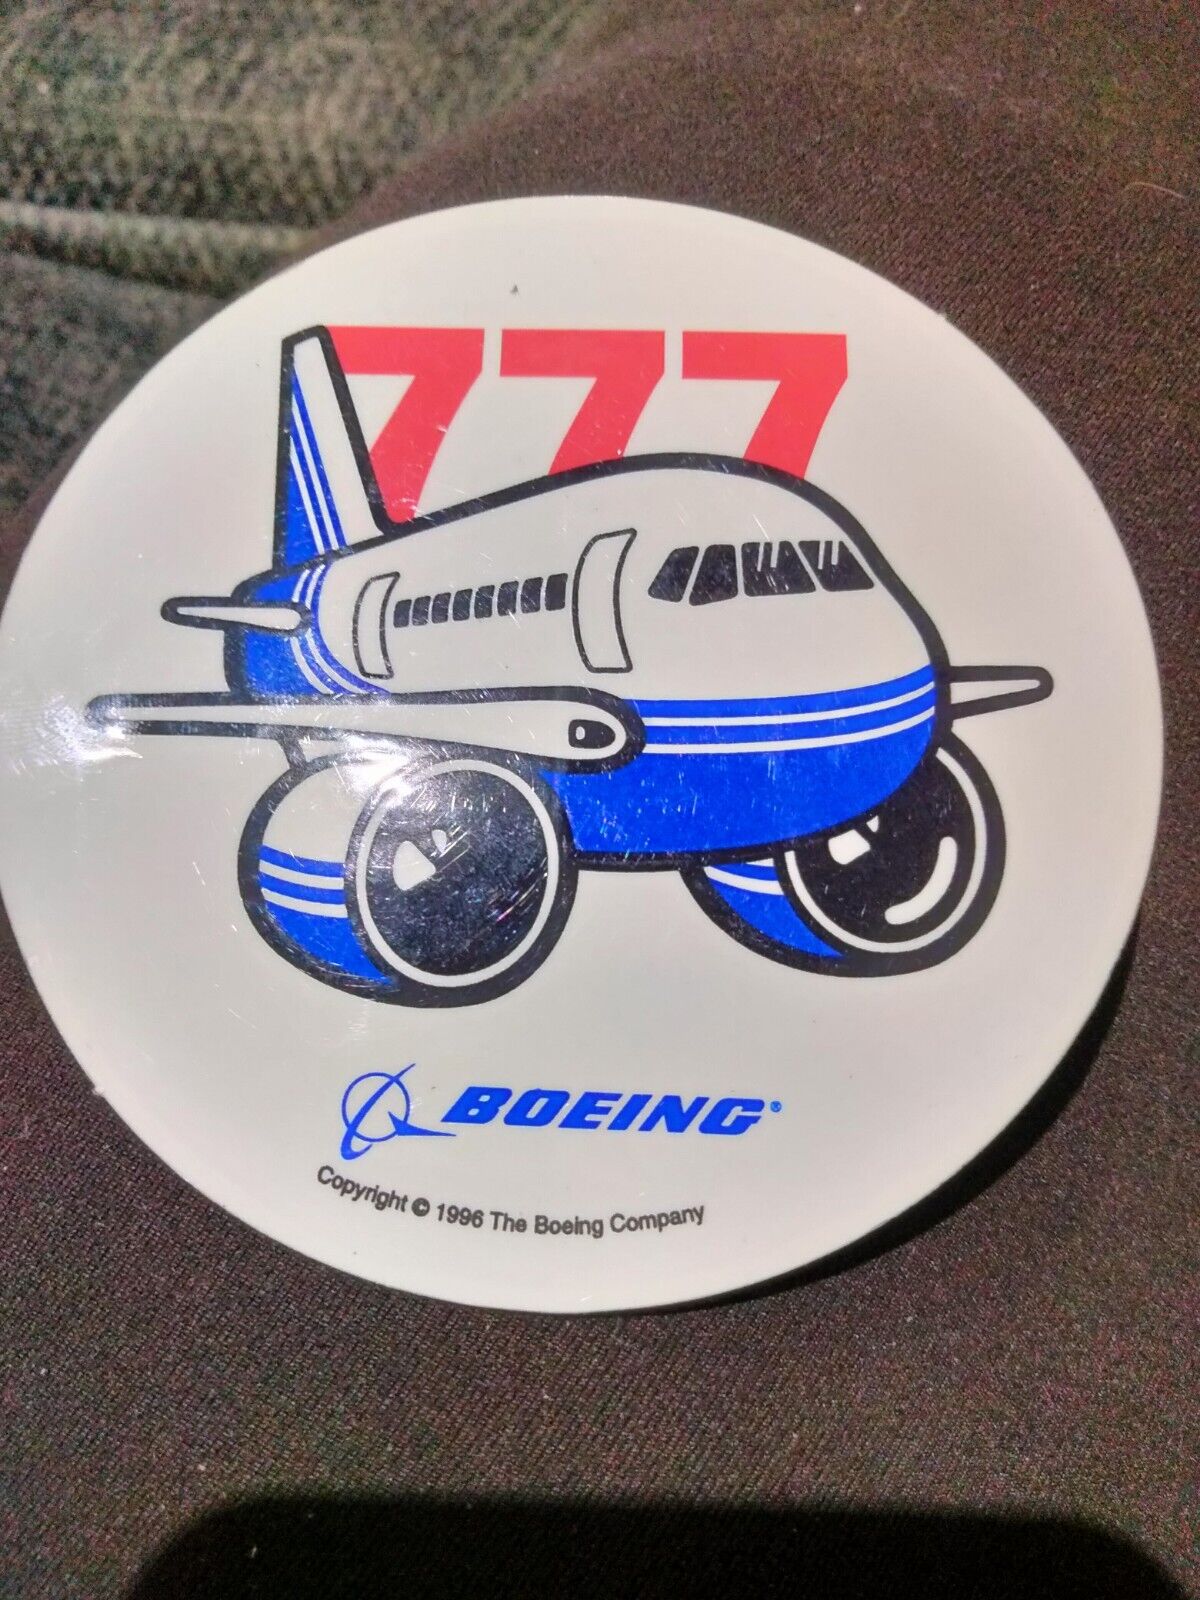 Promotional Stickers Boeing 777 Boeing-Company 1996 Aircraft Aviation USA